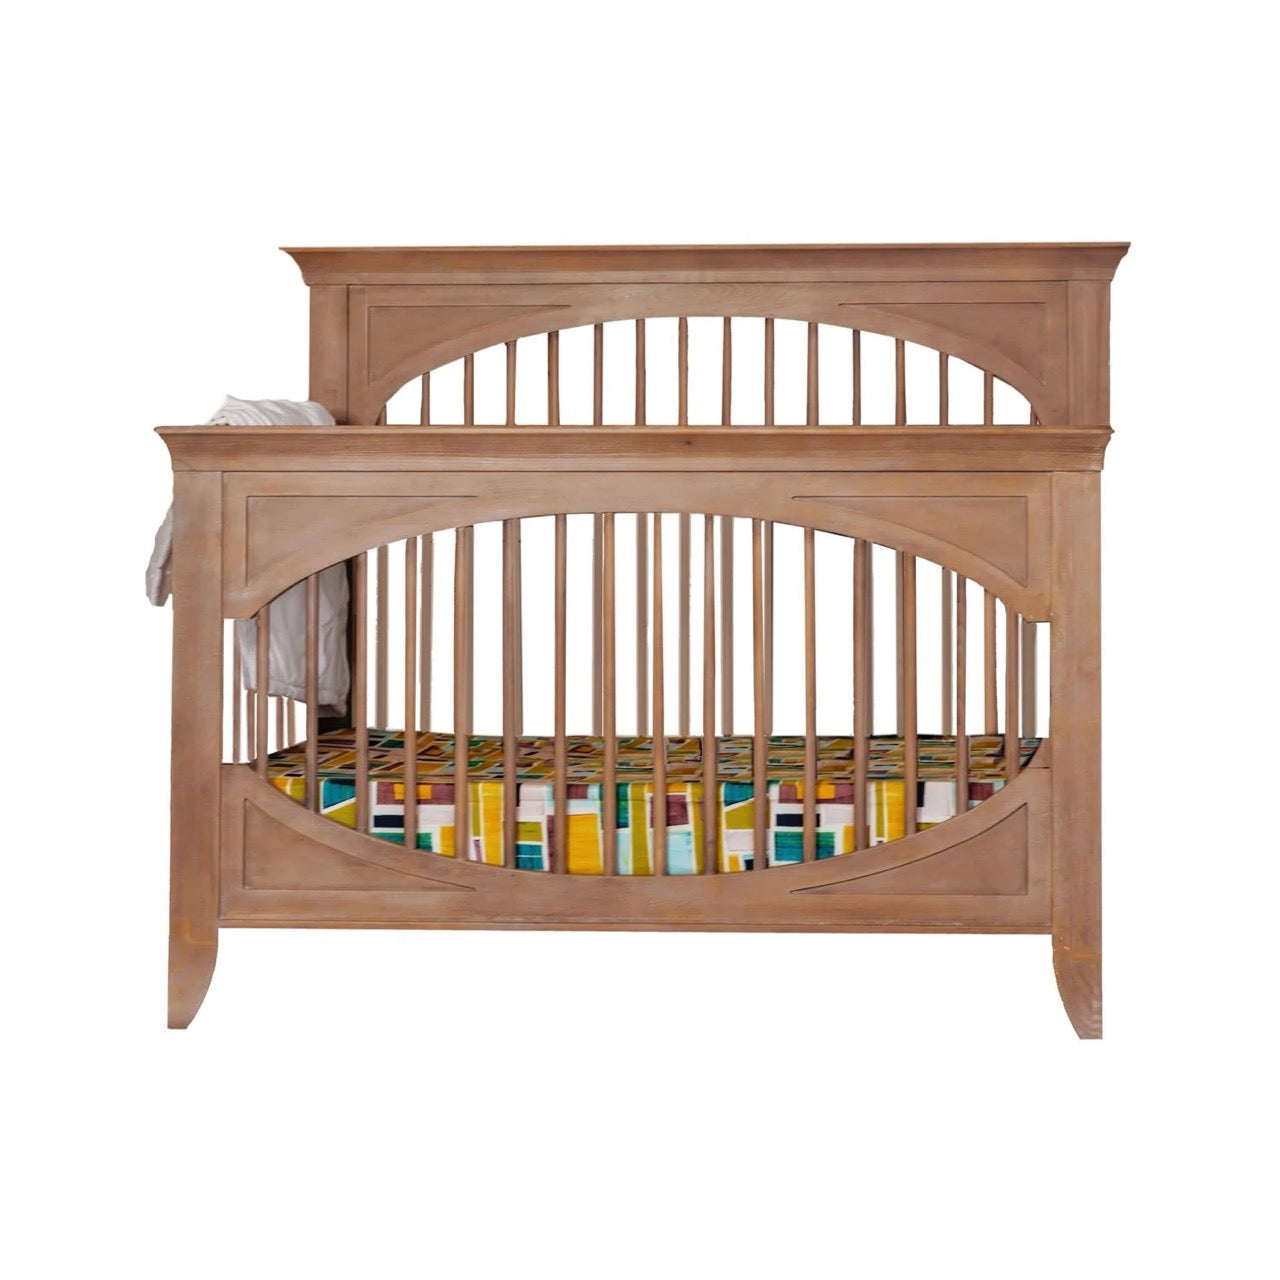 Cameo Oval 4-in-1 Convertible Crib